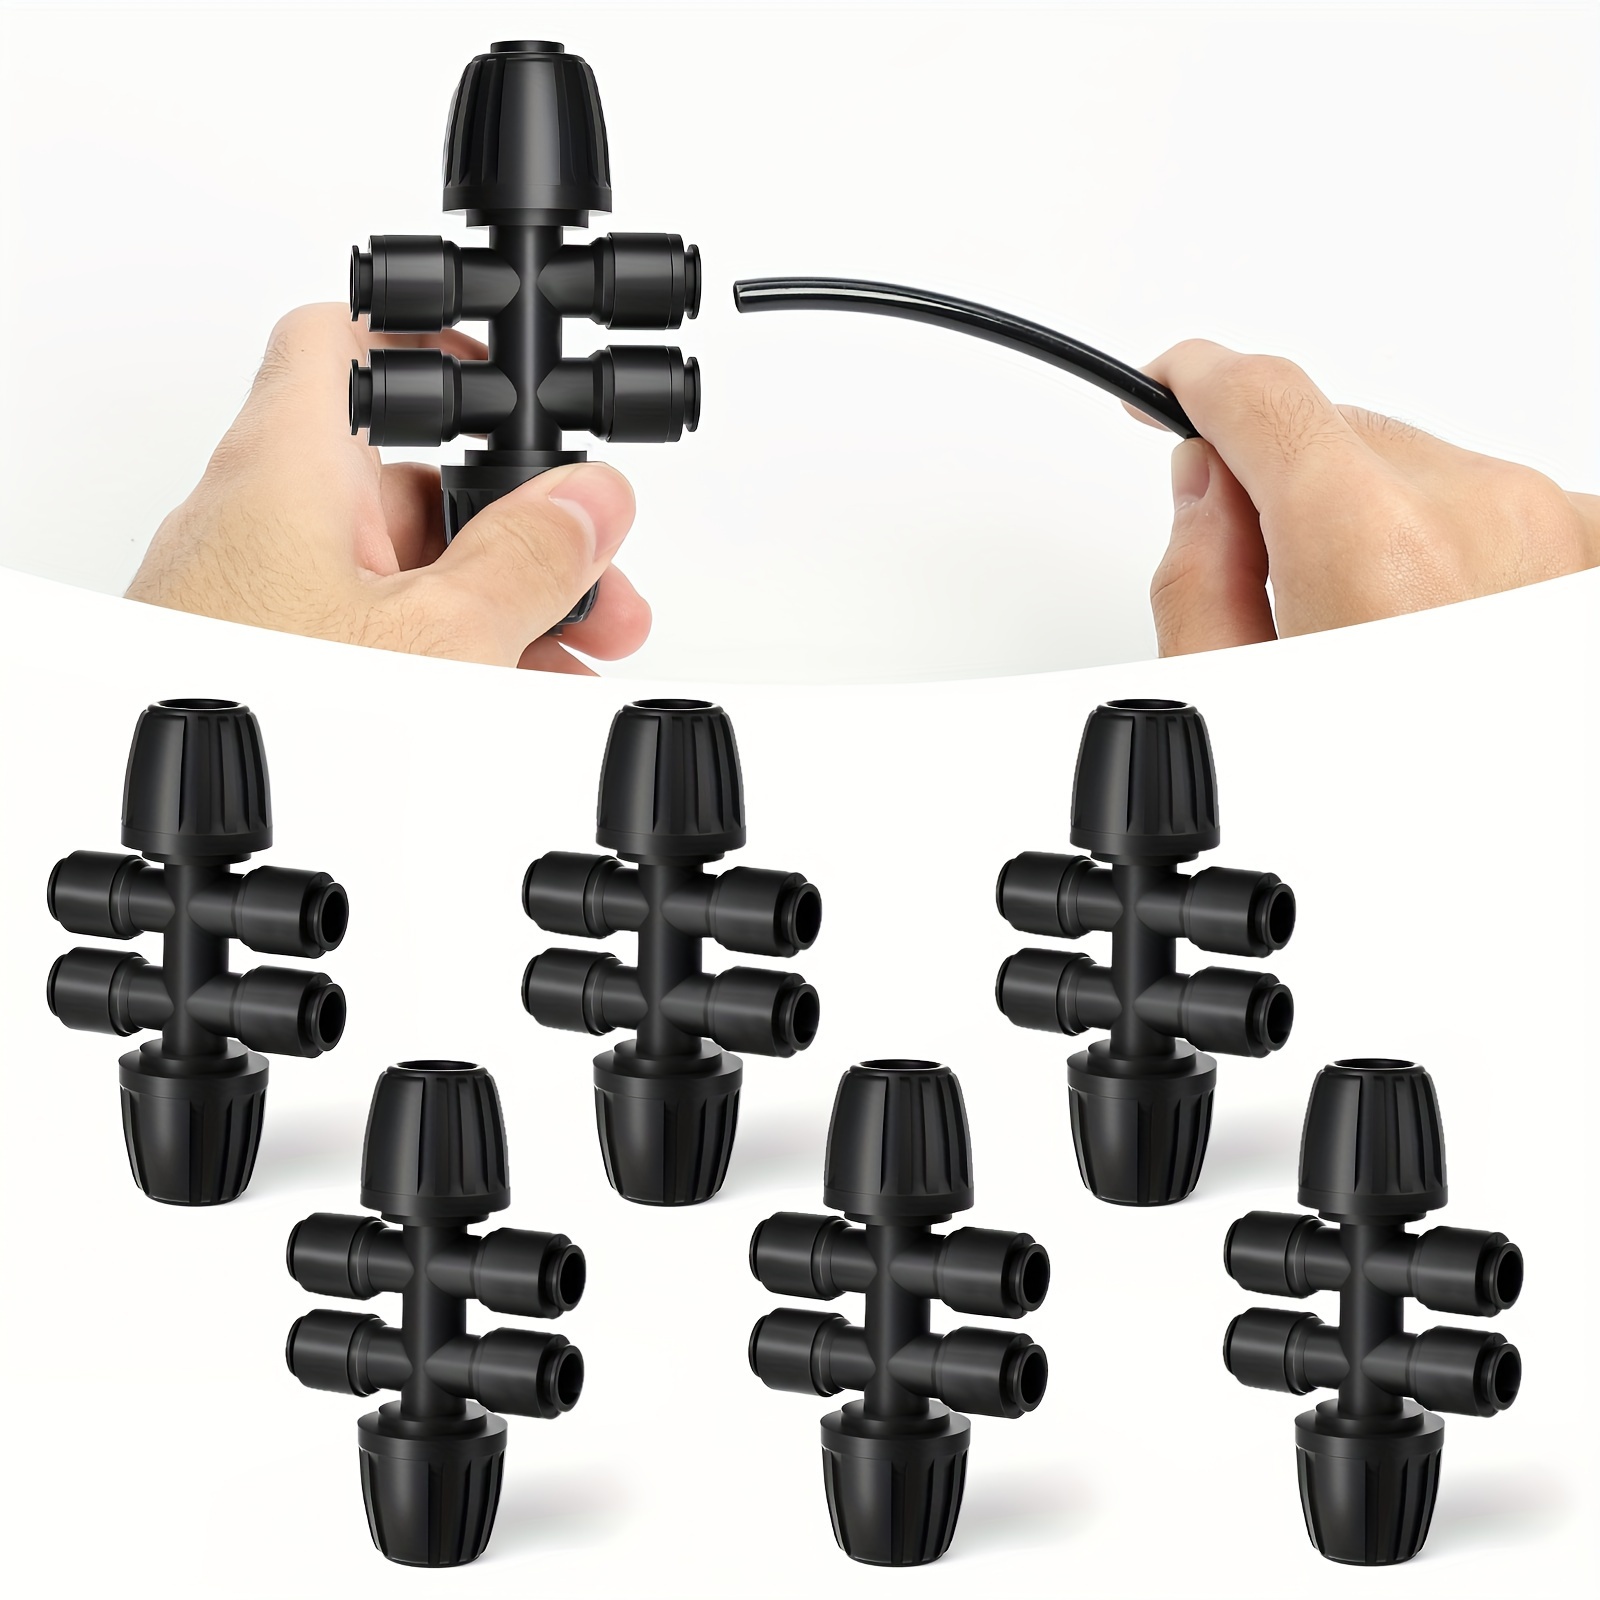 

6-pack Quick Connect Drip Irrigation Tee Splitters, 1/2" To 1/4" Barbed Connectors For Efficient Water Flow - Ideal For Garden & Farm